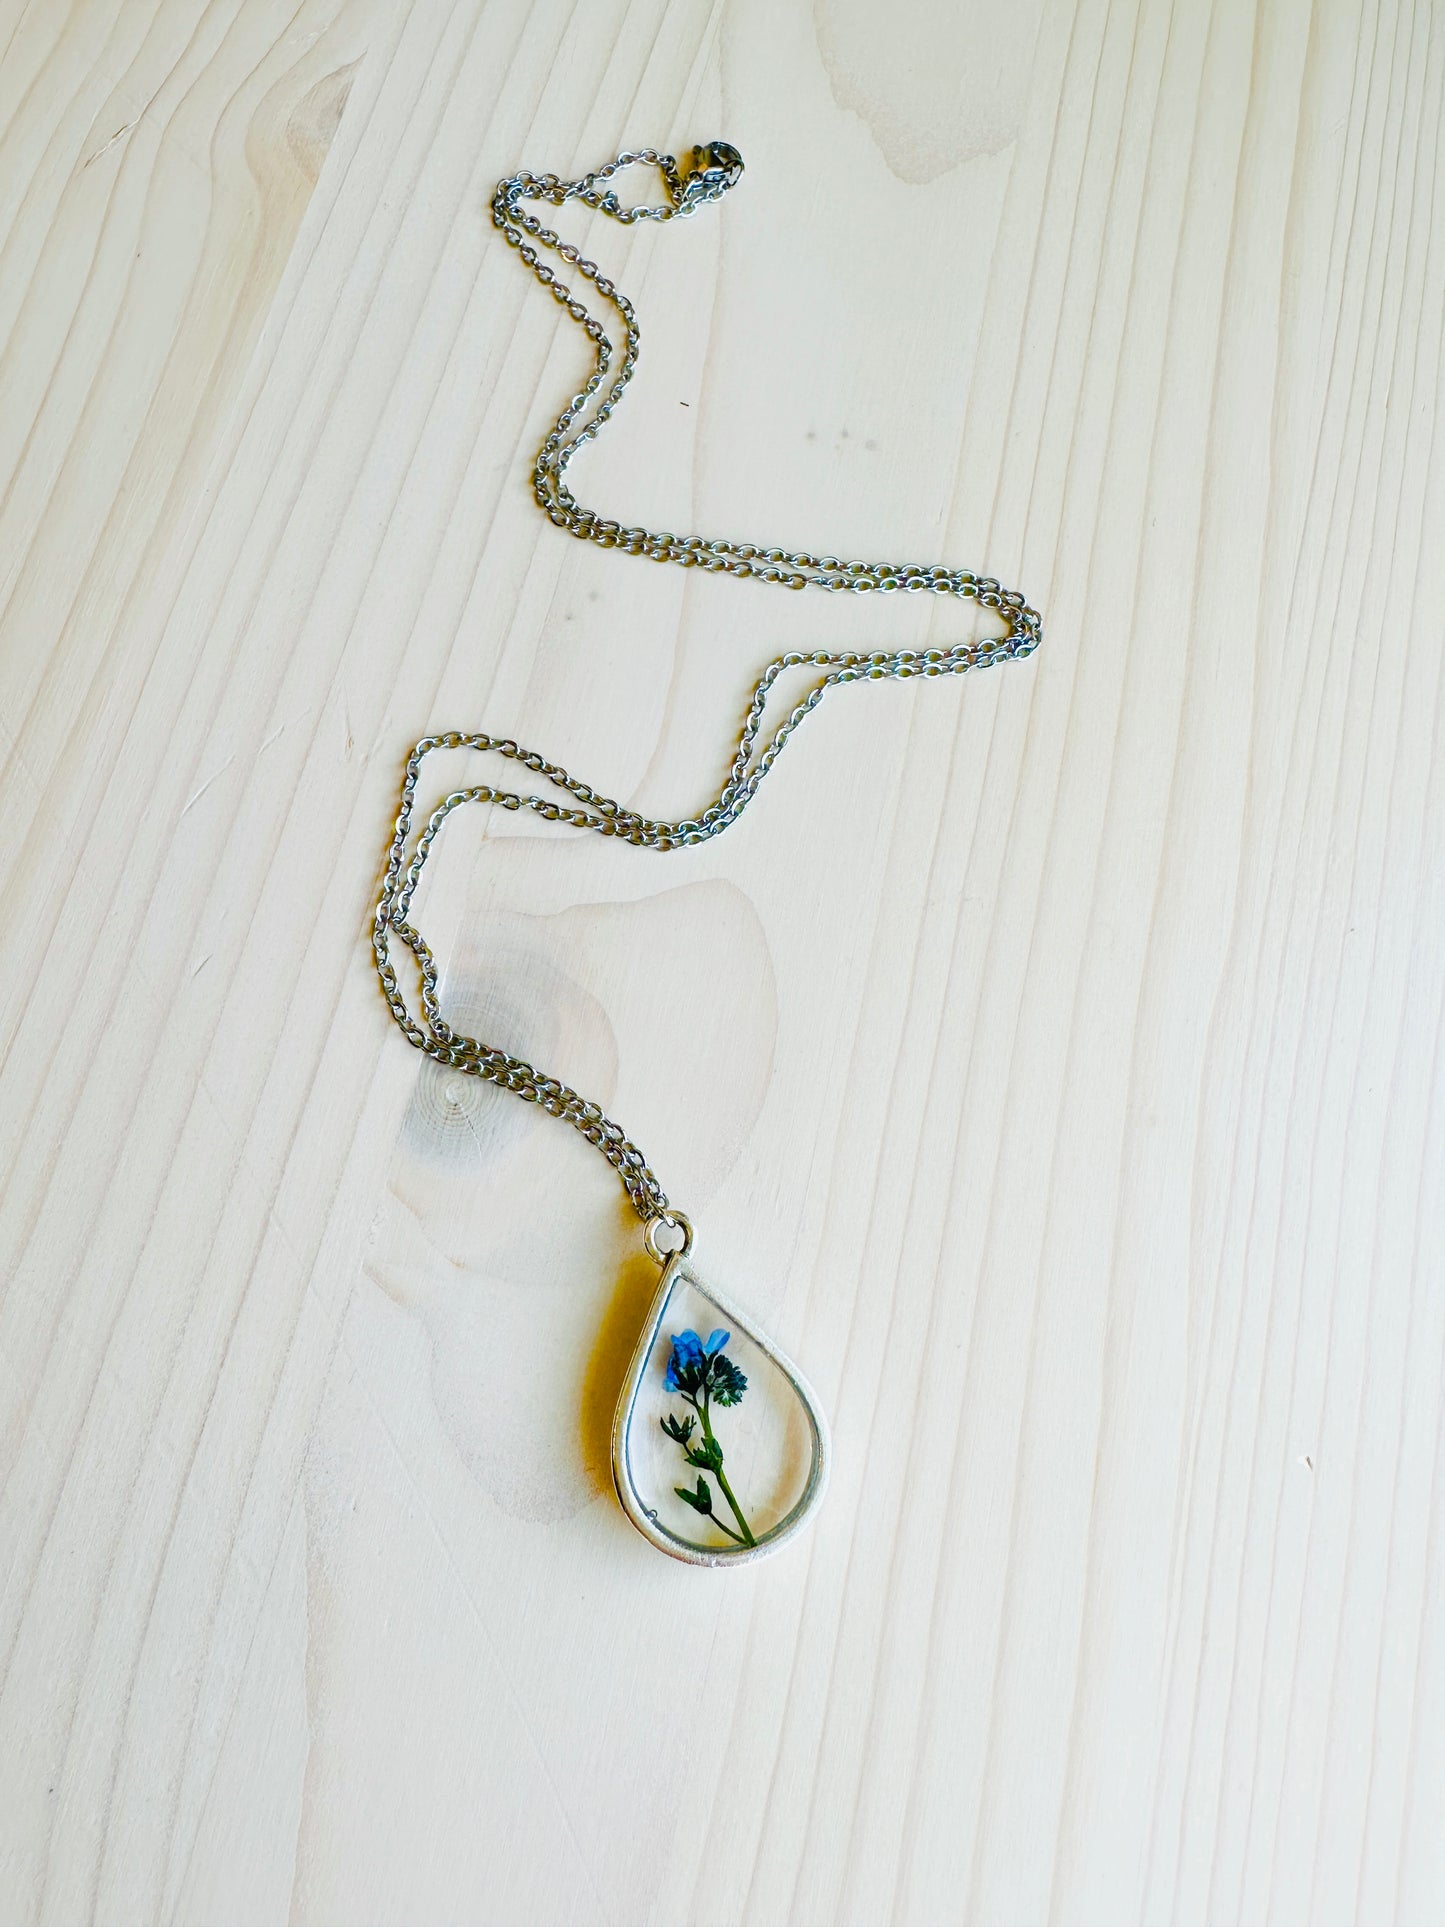 Forget Me Not Necklace Handmade in the USA